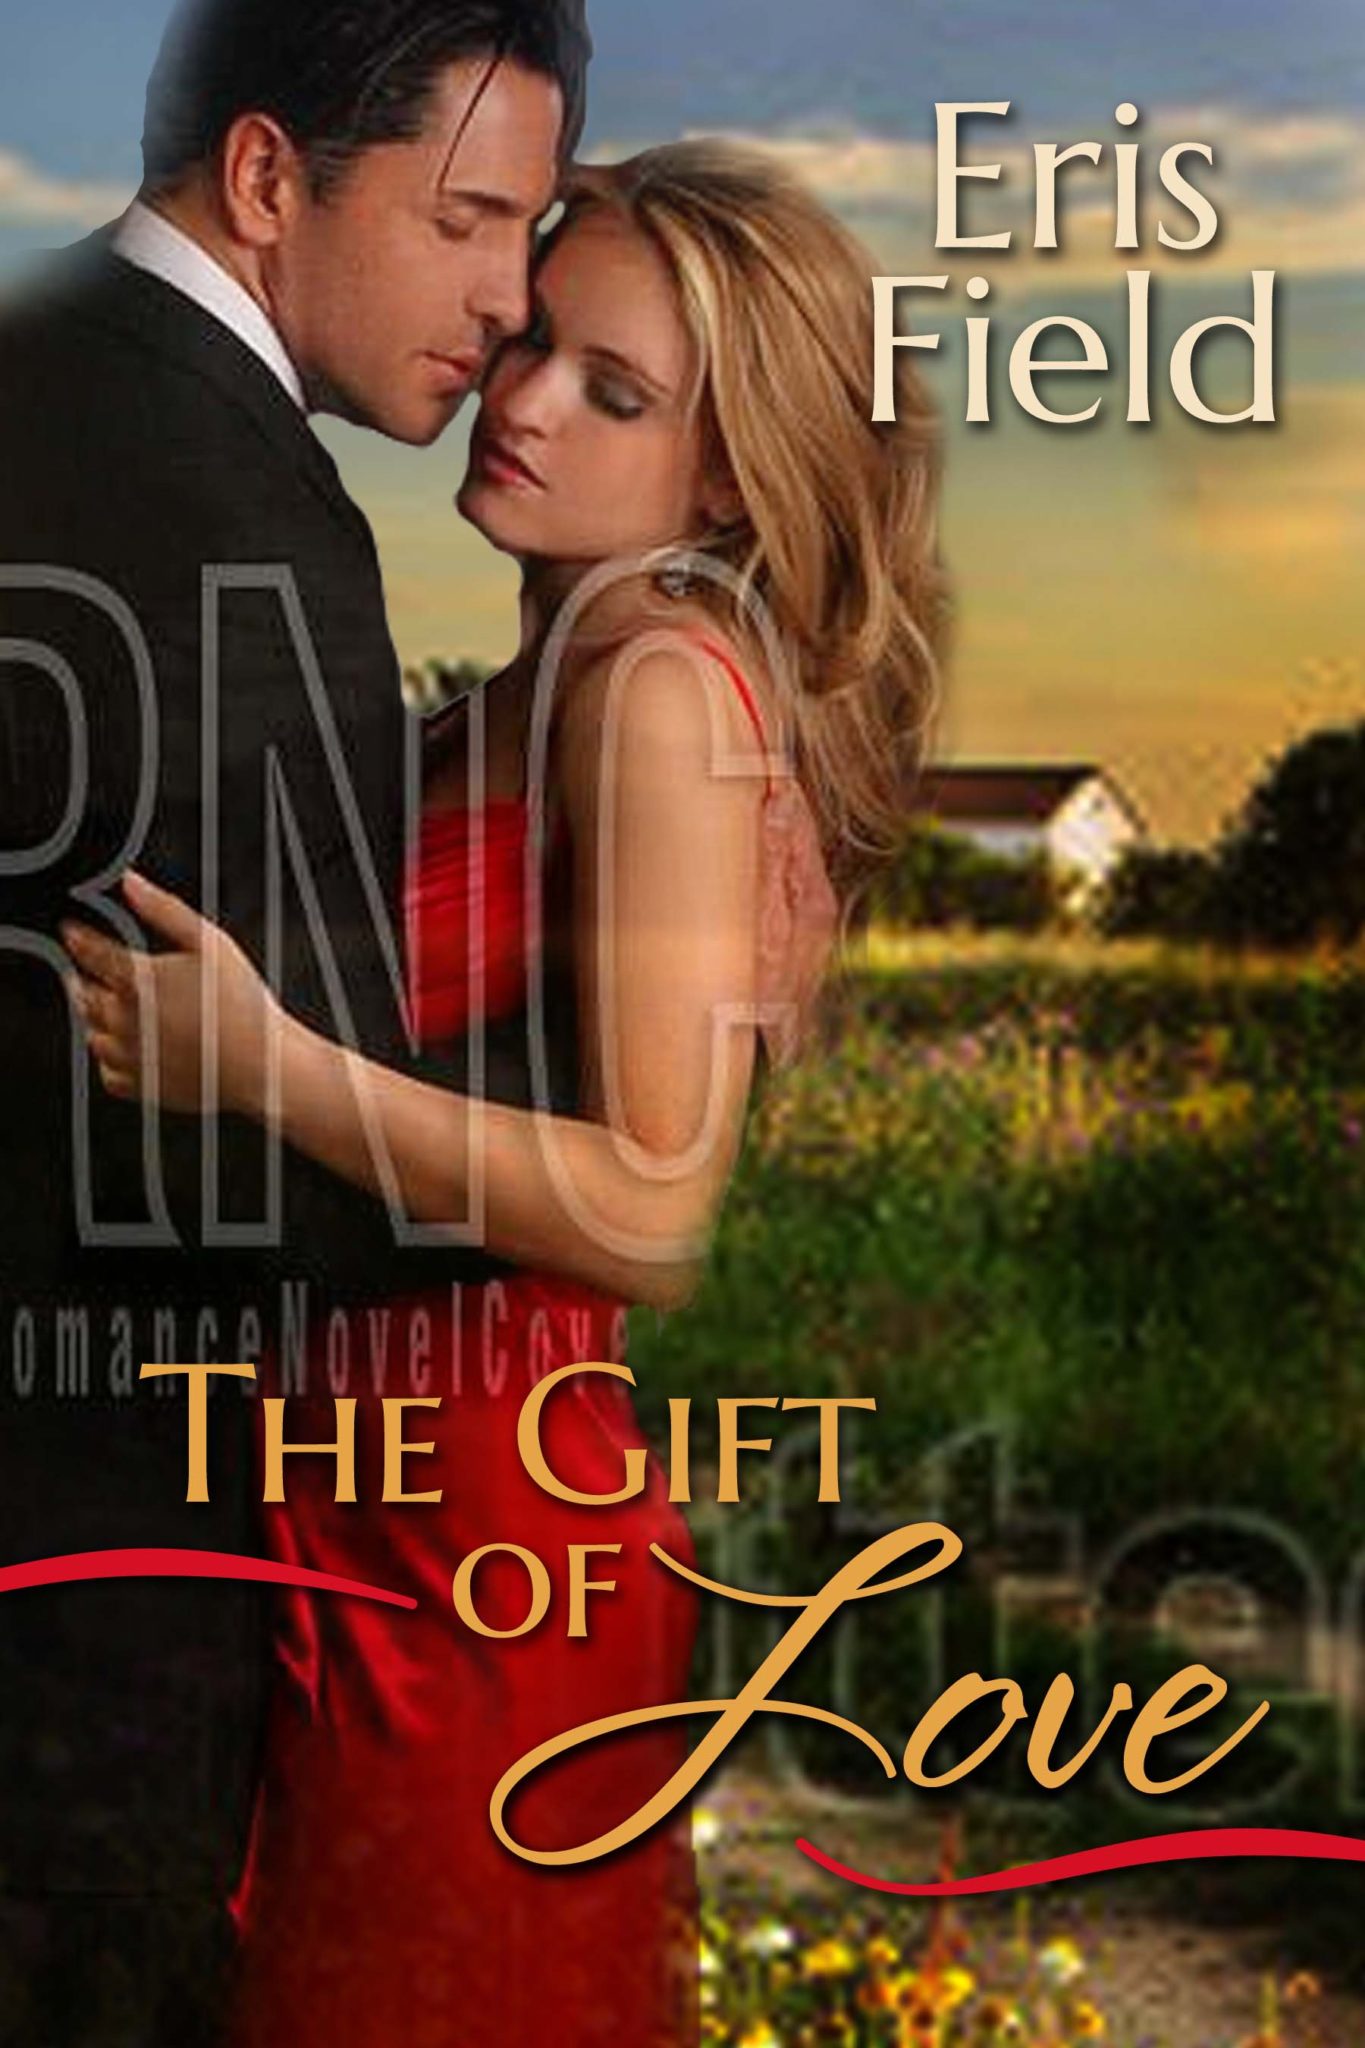 The Gift of Love by Eris Field